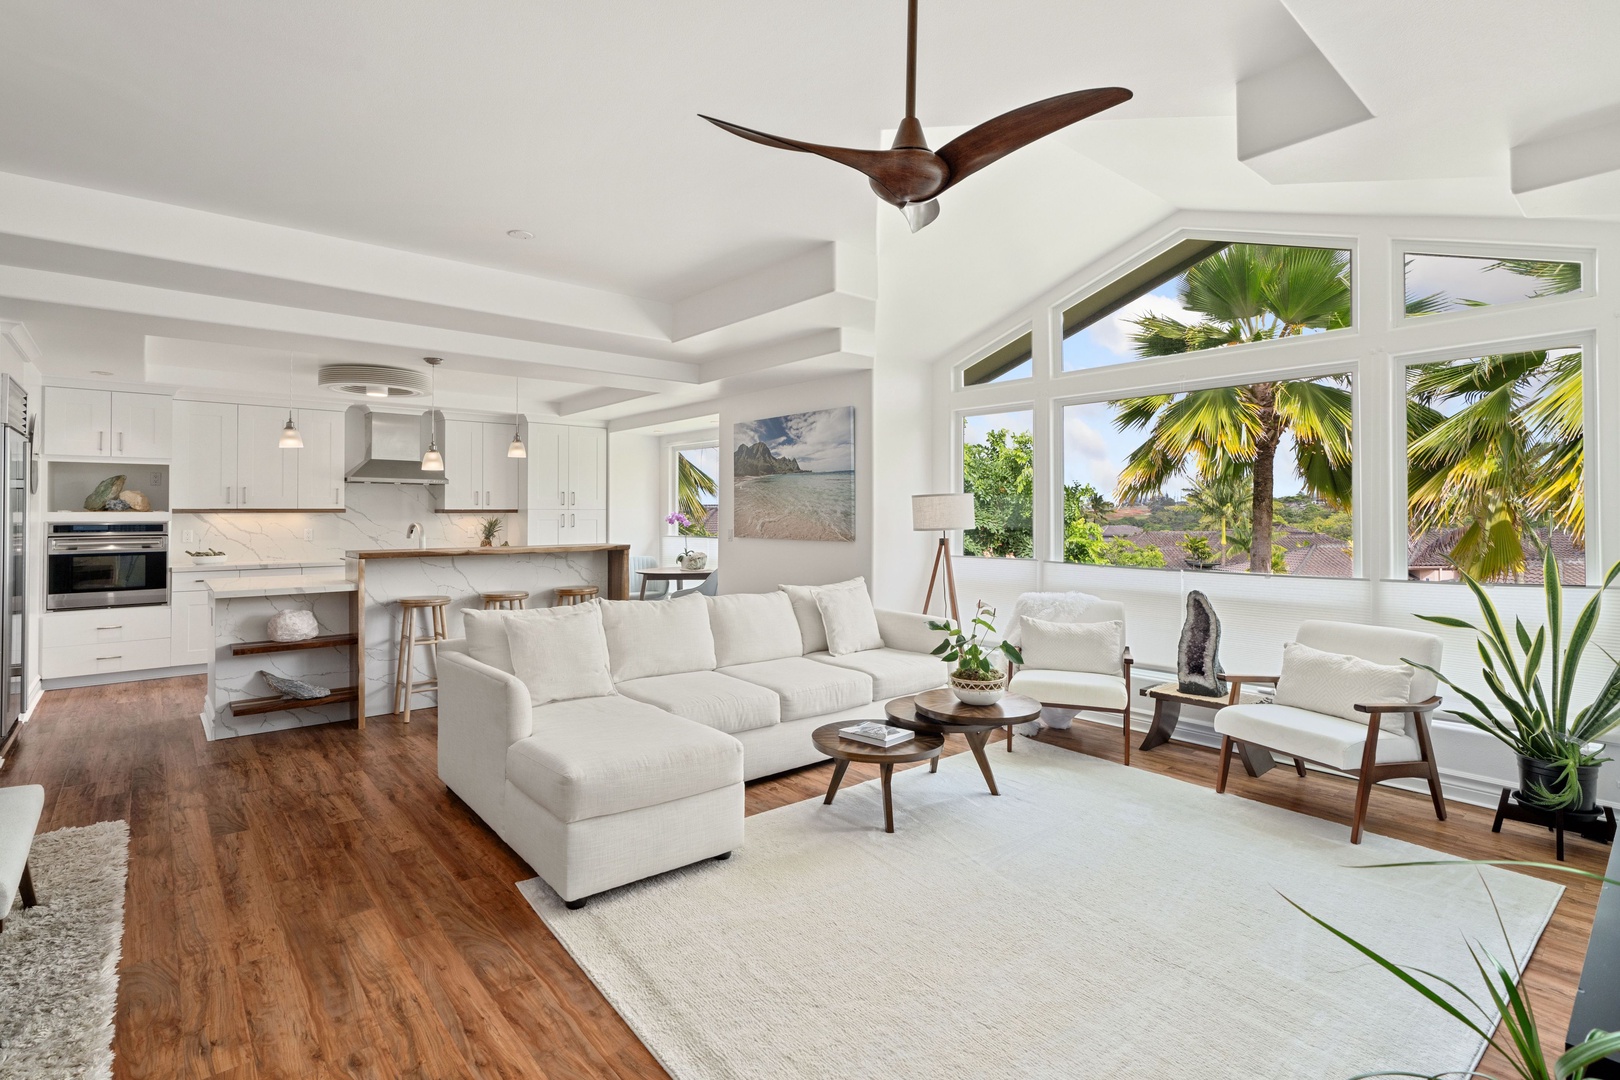 Princeville Vacation Rentals, Tropical Elegance - Spacious living area with tropical views; a true relaxation haven.